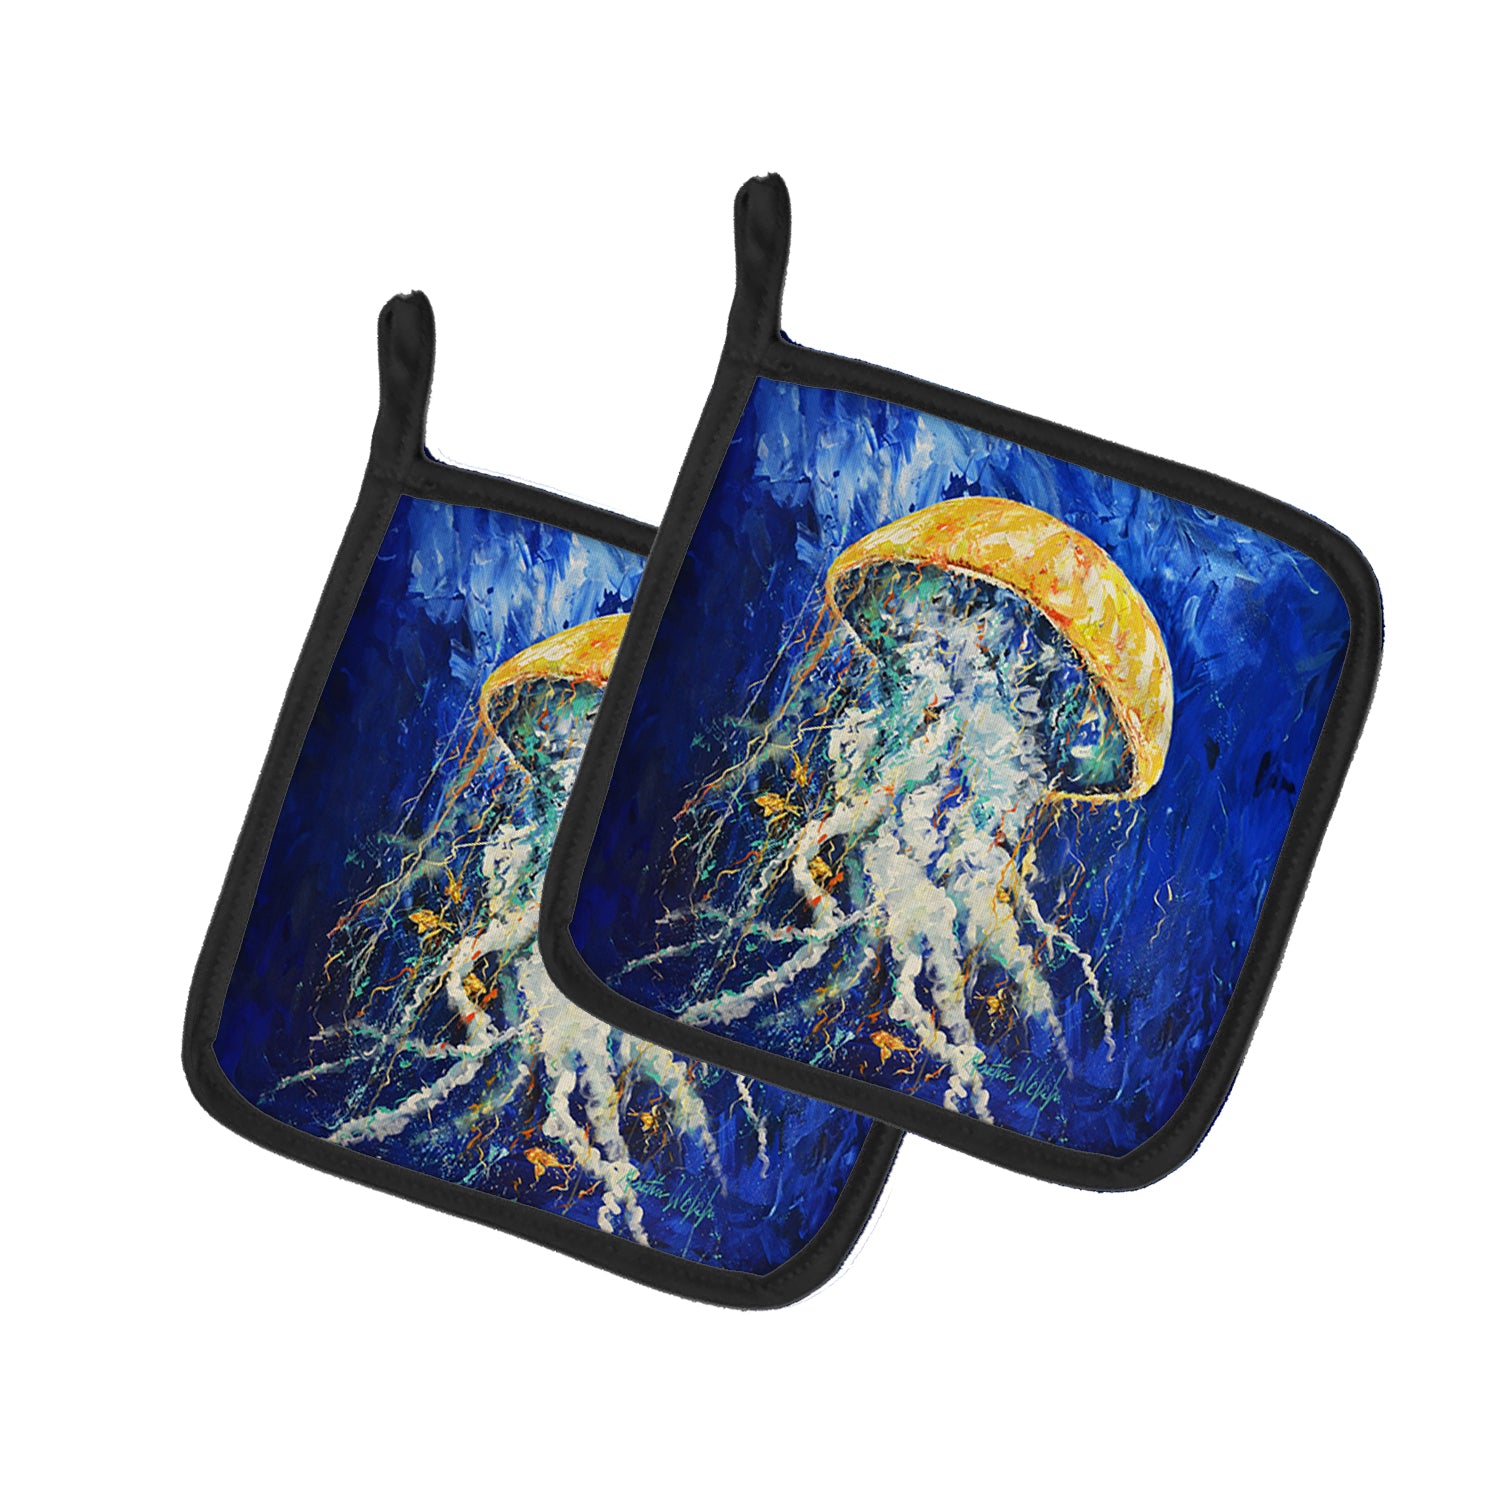 Buy this Free Fall Jellyfish Pair of Pot Holders